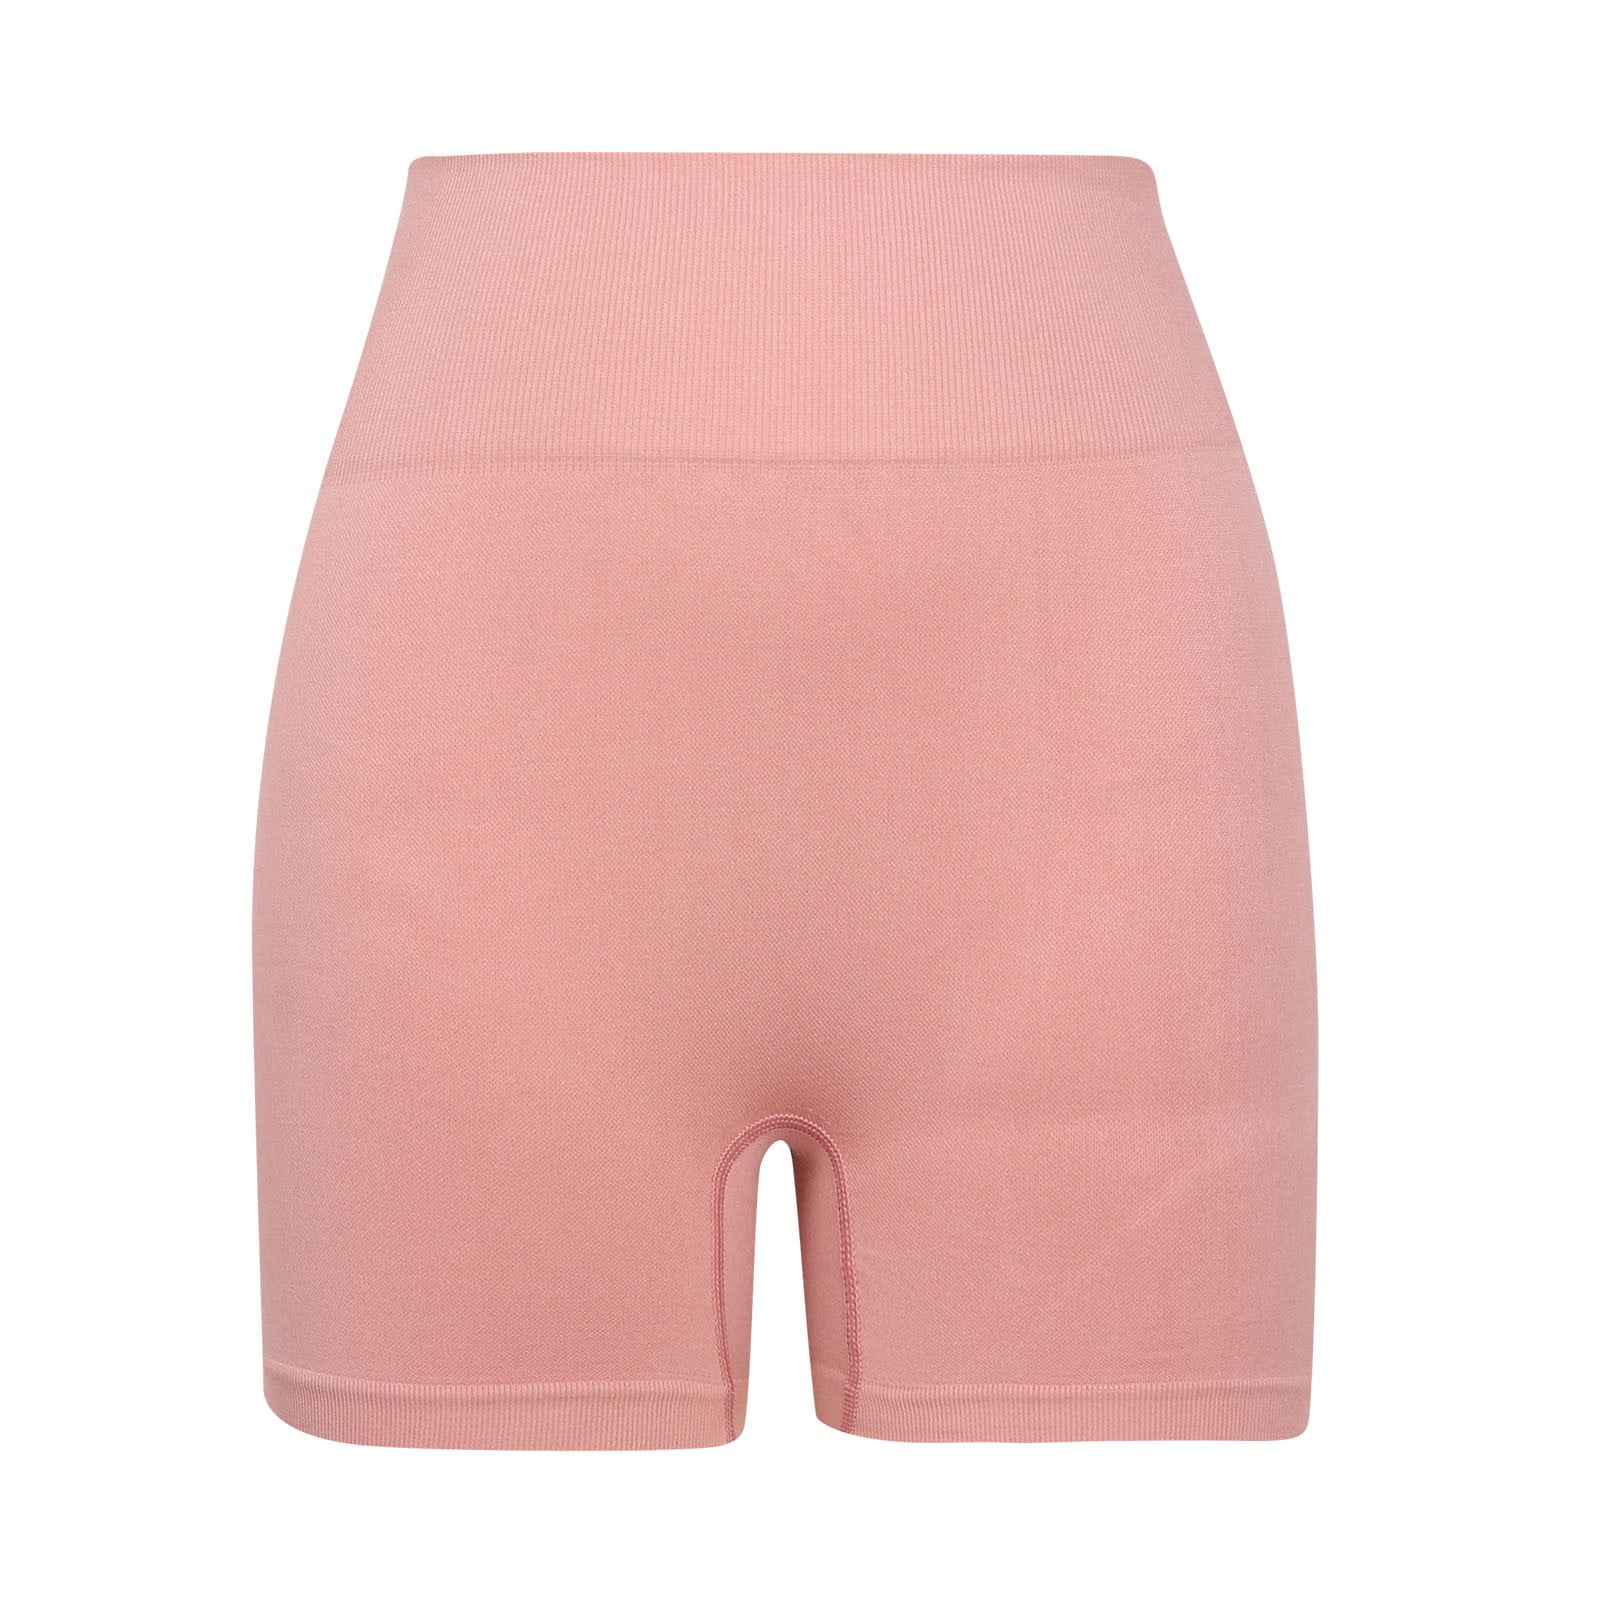 Womens High Waist Honey Peach Hips Nude Vogo Yoga Shorts By Darcsport  Perfect For Fitness And Sports In Summer From Zaqhuadi001, $6.43